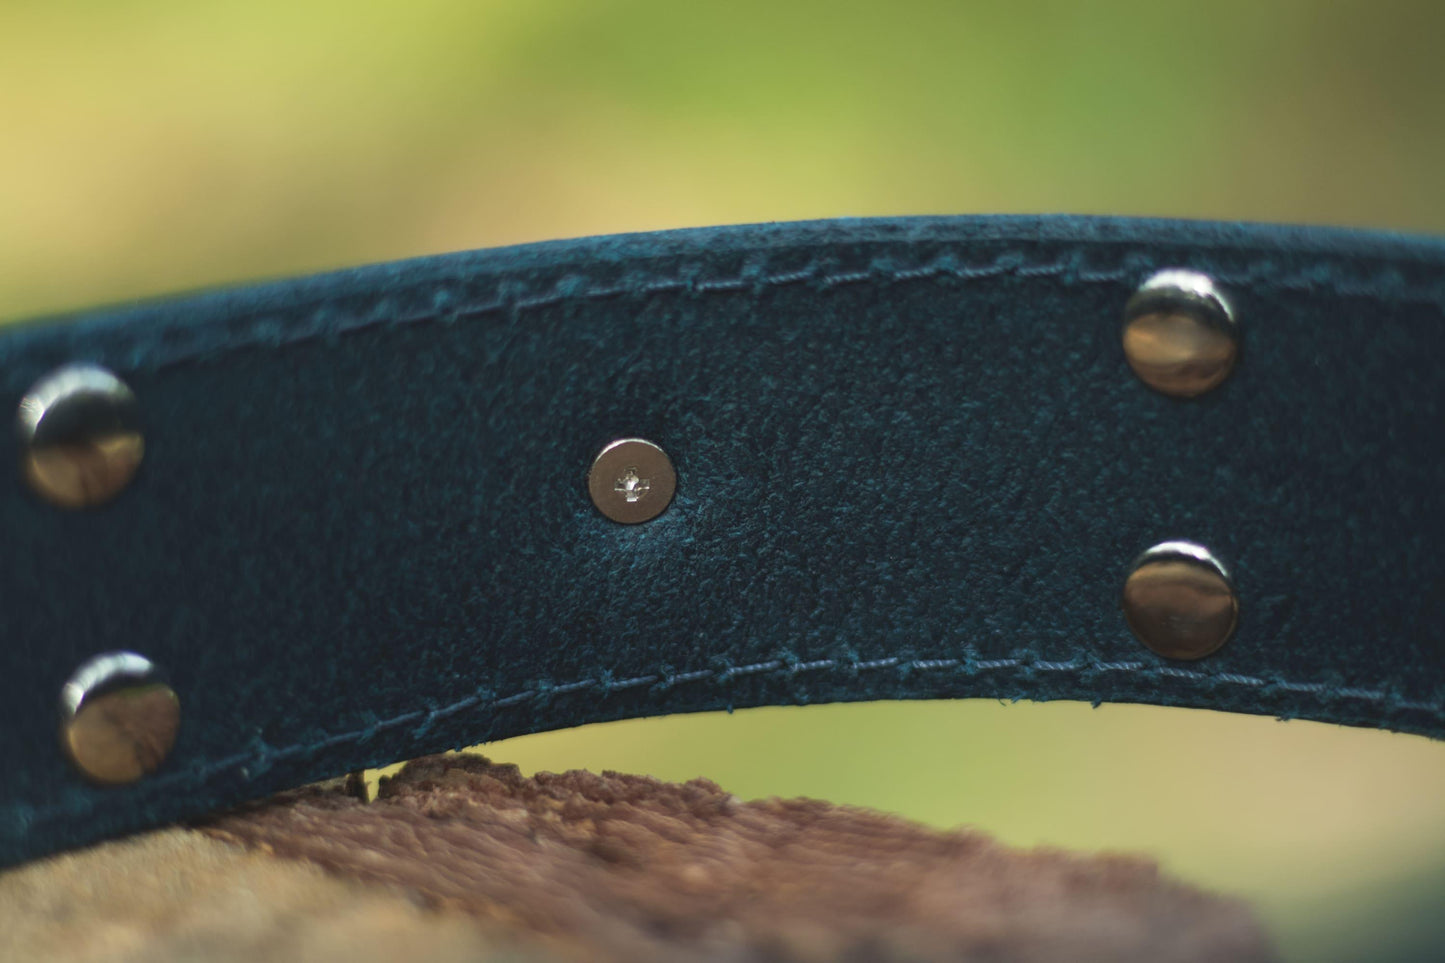 Handmade blue leather STUDDED dog collar - European handmade dog accessories by My Wild Other